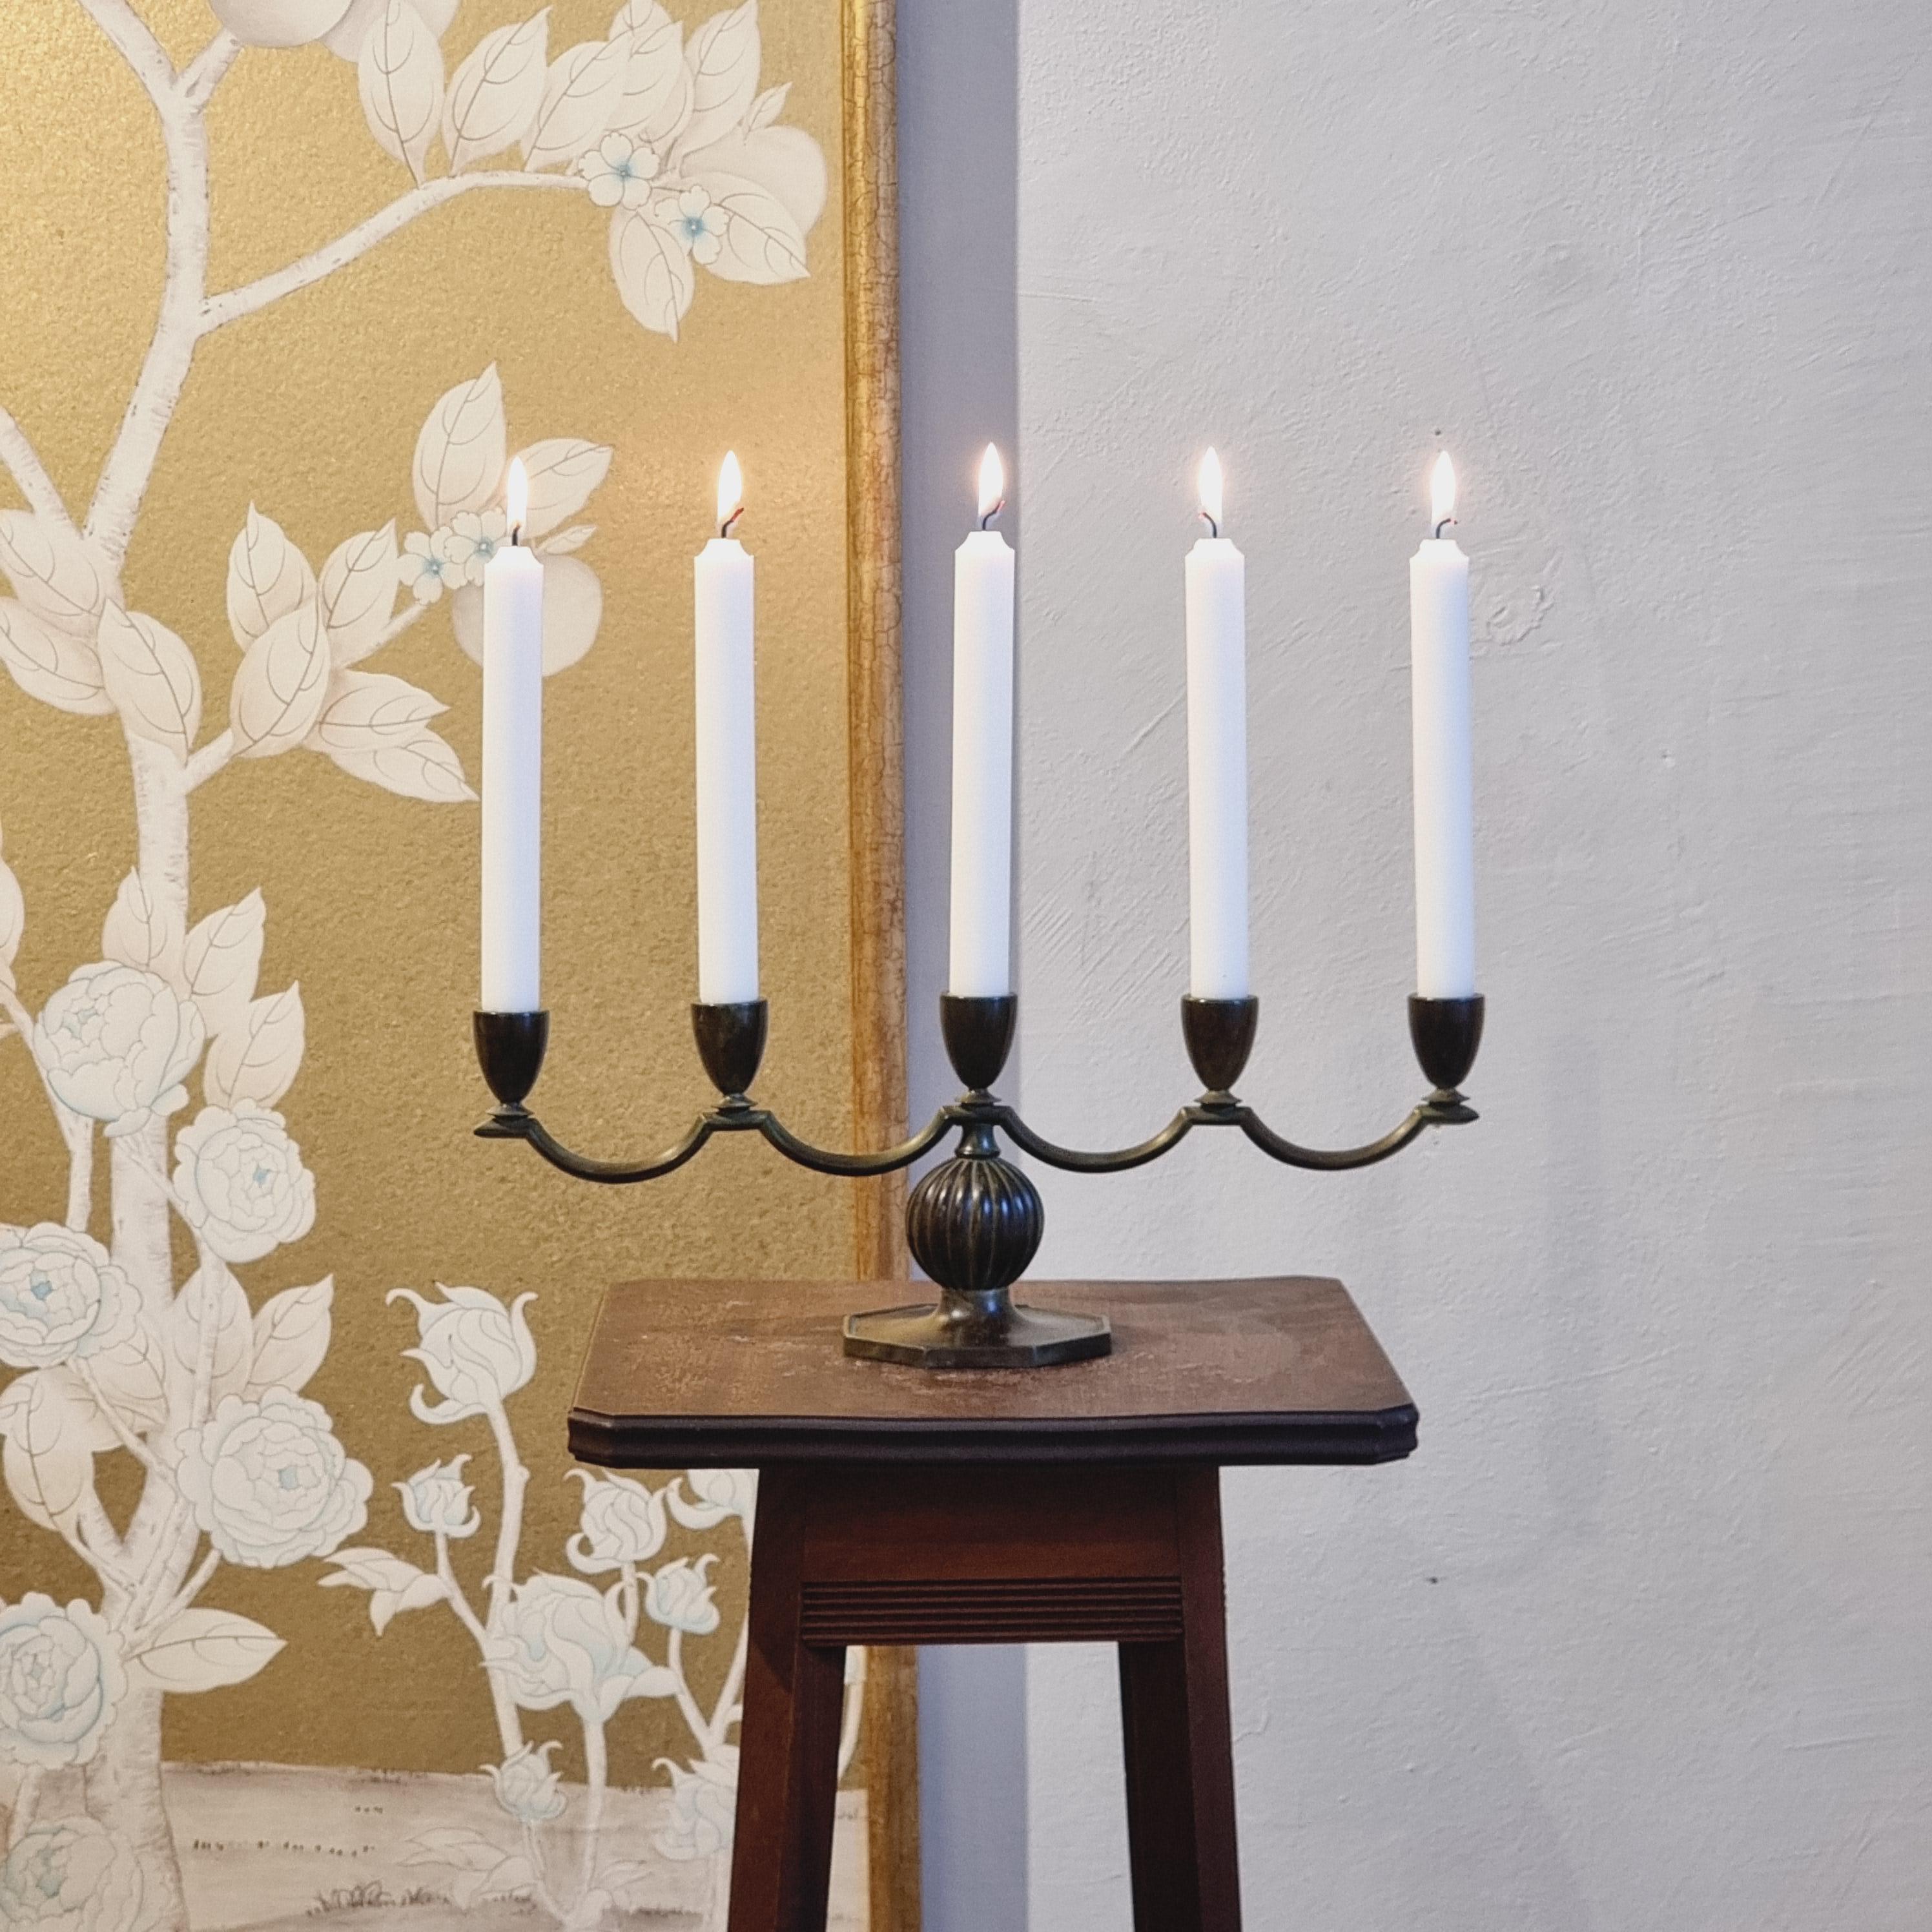 A decorative, solid bronze candelabra with  by Jacob Ängman for GAB / Guldaktiebolaget. With antique patina finish. Sweden, 1920/30s - Art Deco / Swedish Grace. In beautiful condition, smaller signs of age and wear. 

Marked: GAB Brons, 91